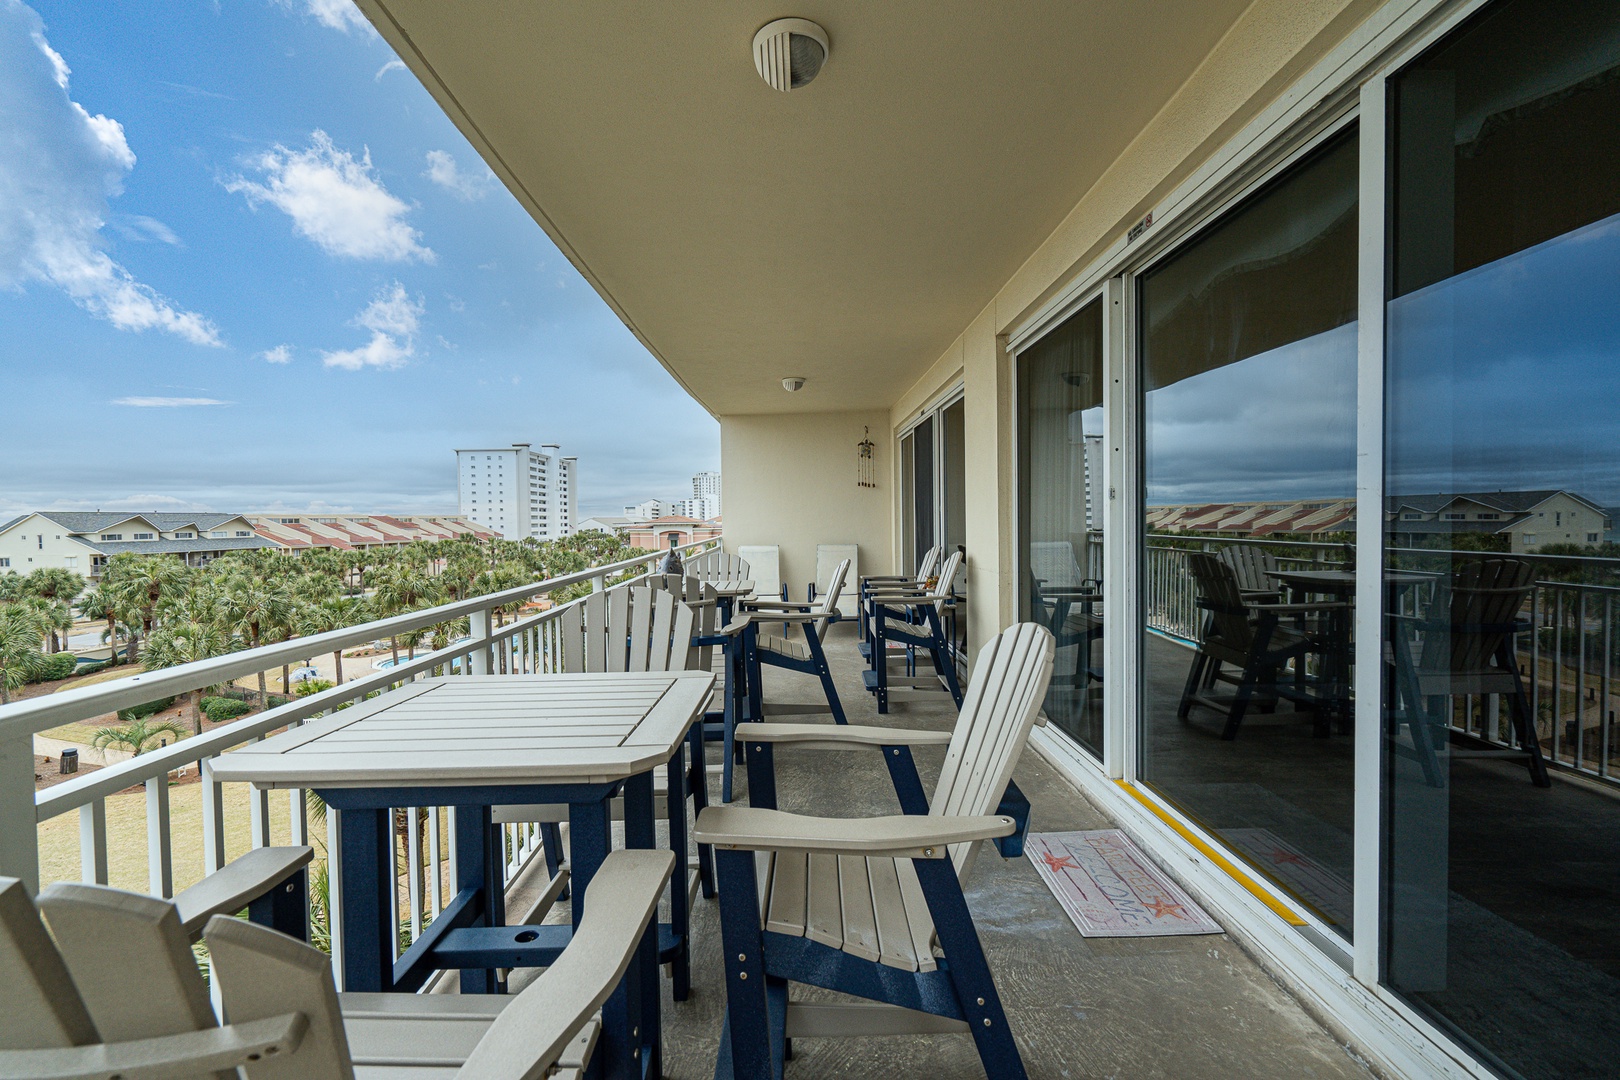 Step out onto the balcony to relax & dine with stunning water views